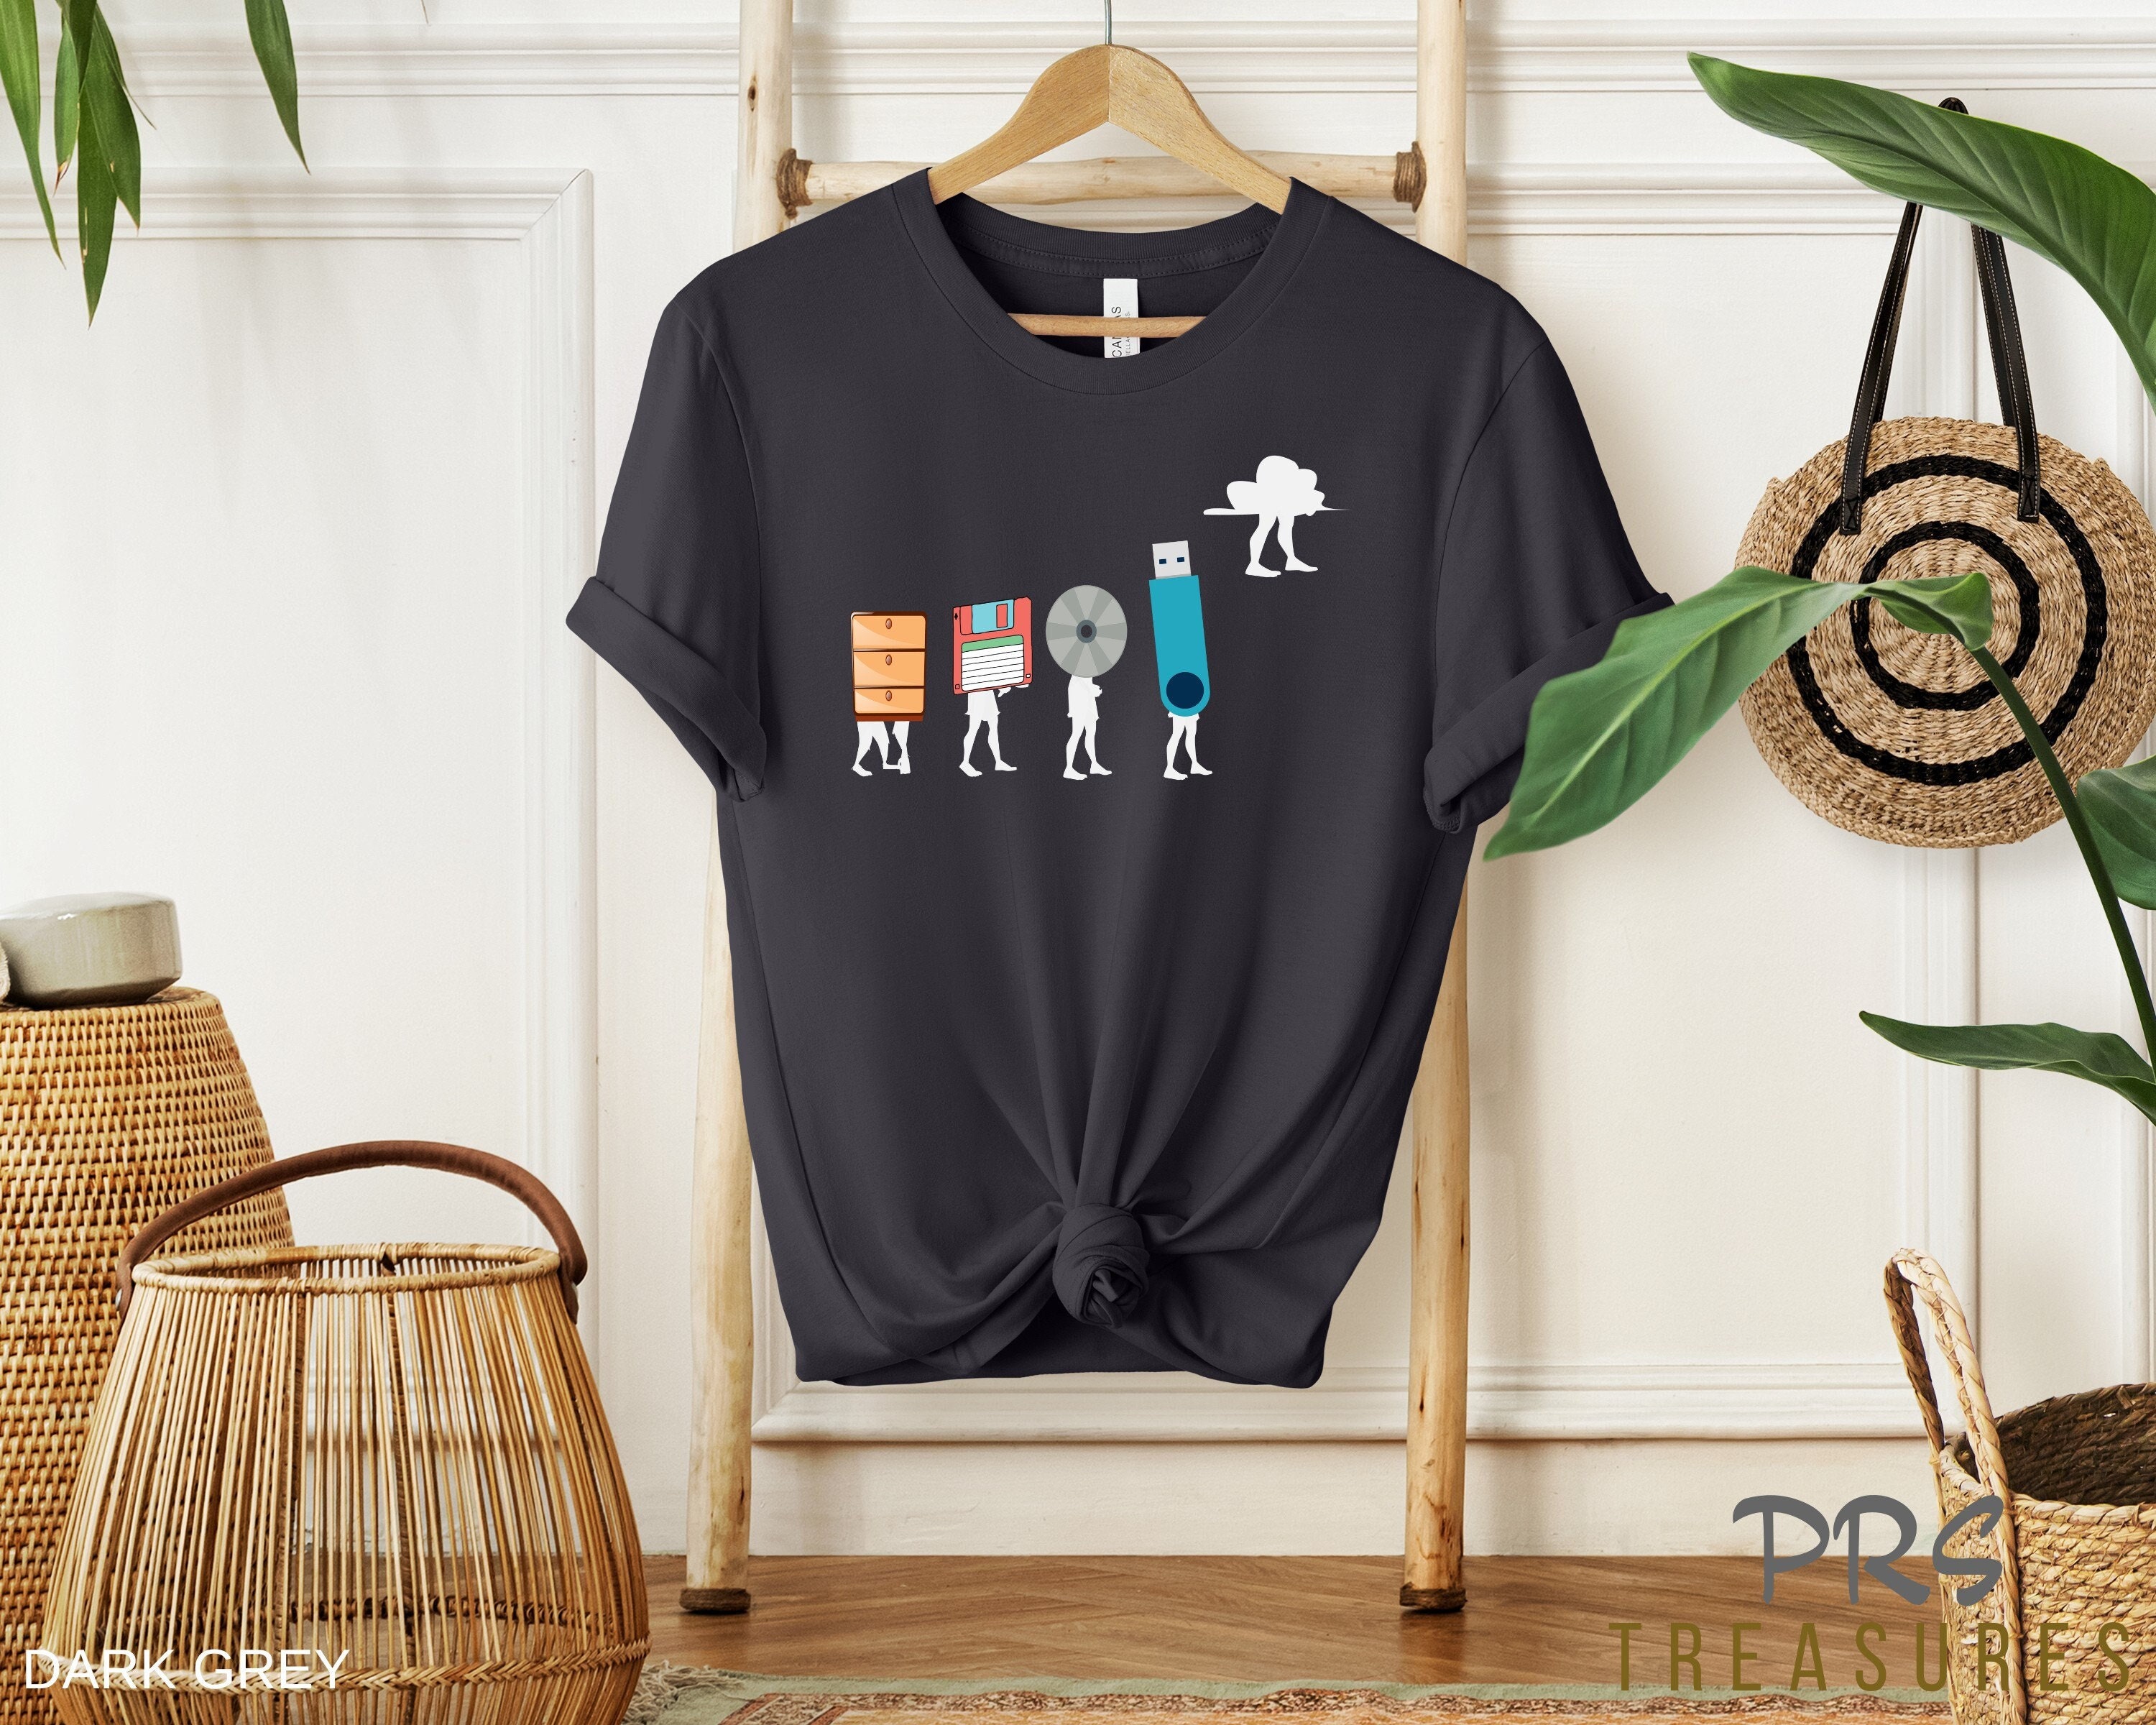 Computer Gaming Keyboard graphic - Funny Gamer Quote design Kids T-Shirt  for Sale by railwayblogger